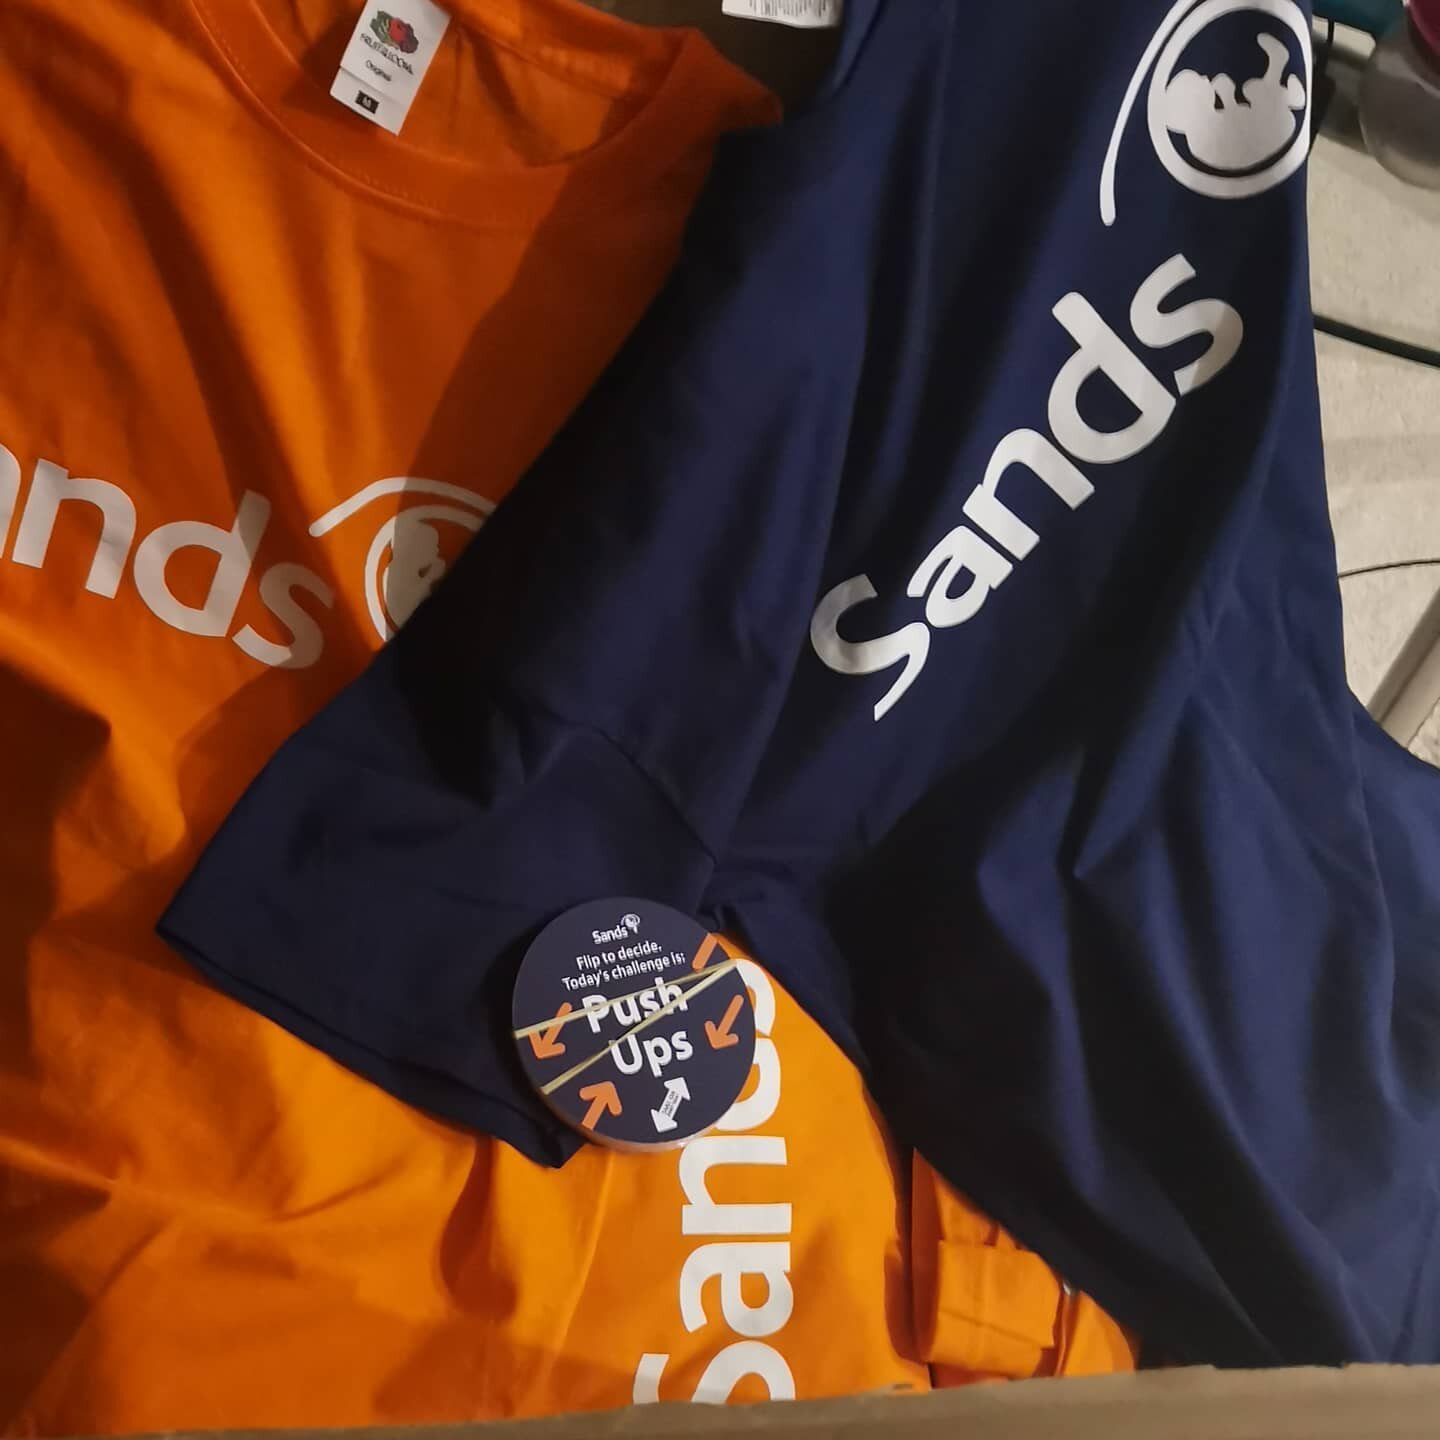 Yeah everyone may love the Leeds shirts, but our ones are better.

New delivery from @sandscharity  ready for our 2,000 (well technically 34,000) in May challenge 💪🏻

#leeds #europeansuperleague #sands #sandsunited #2000inmay #takeon2000